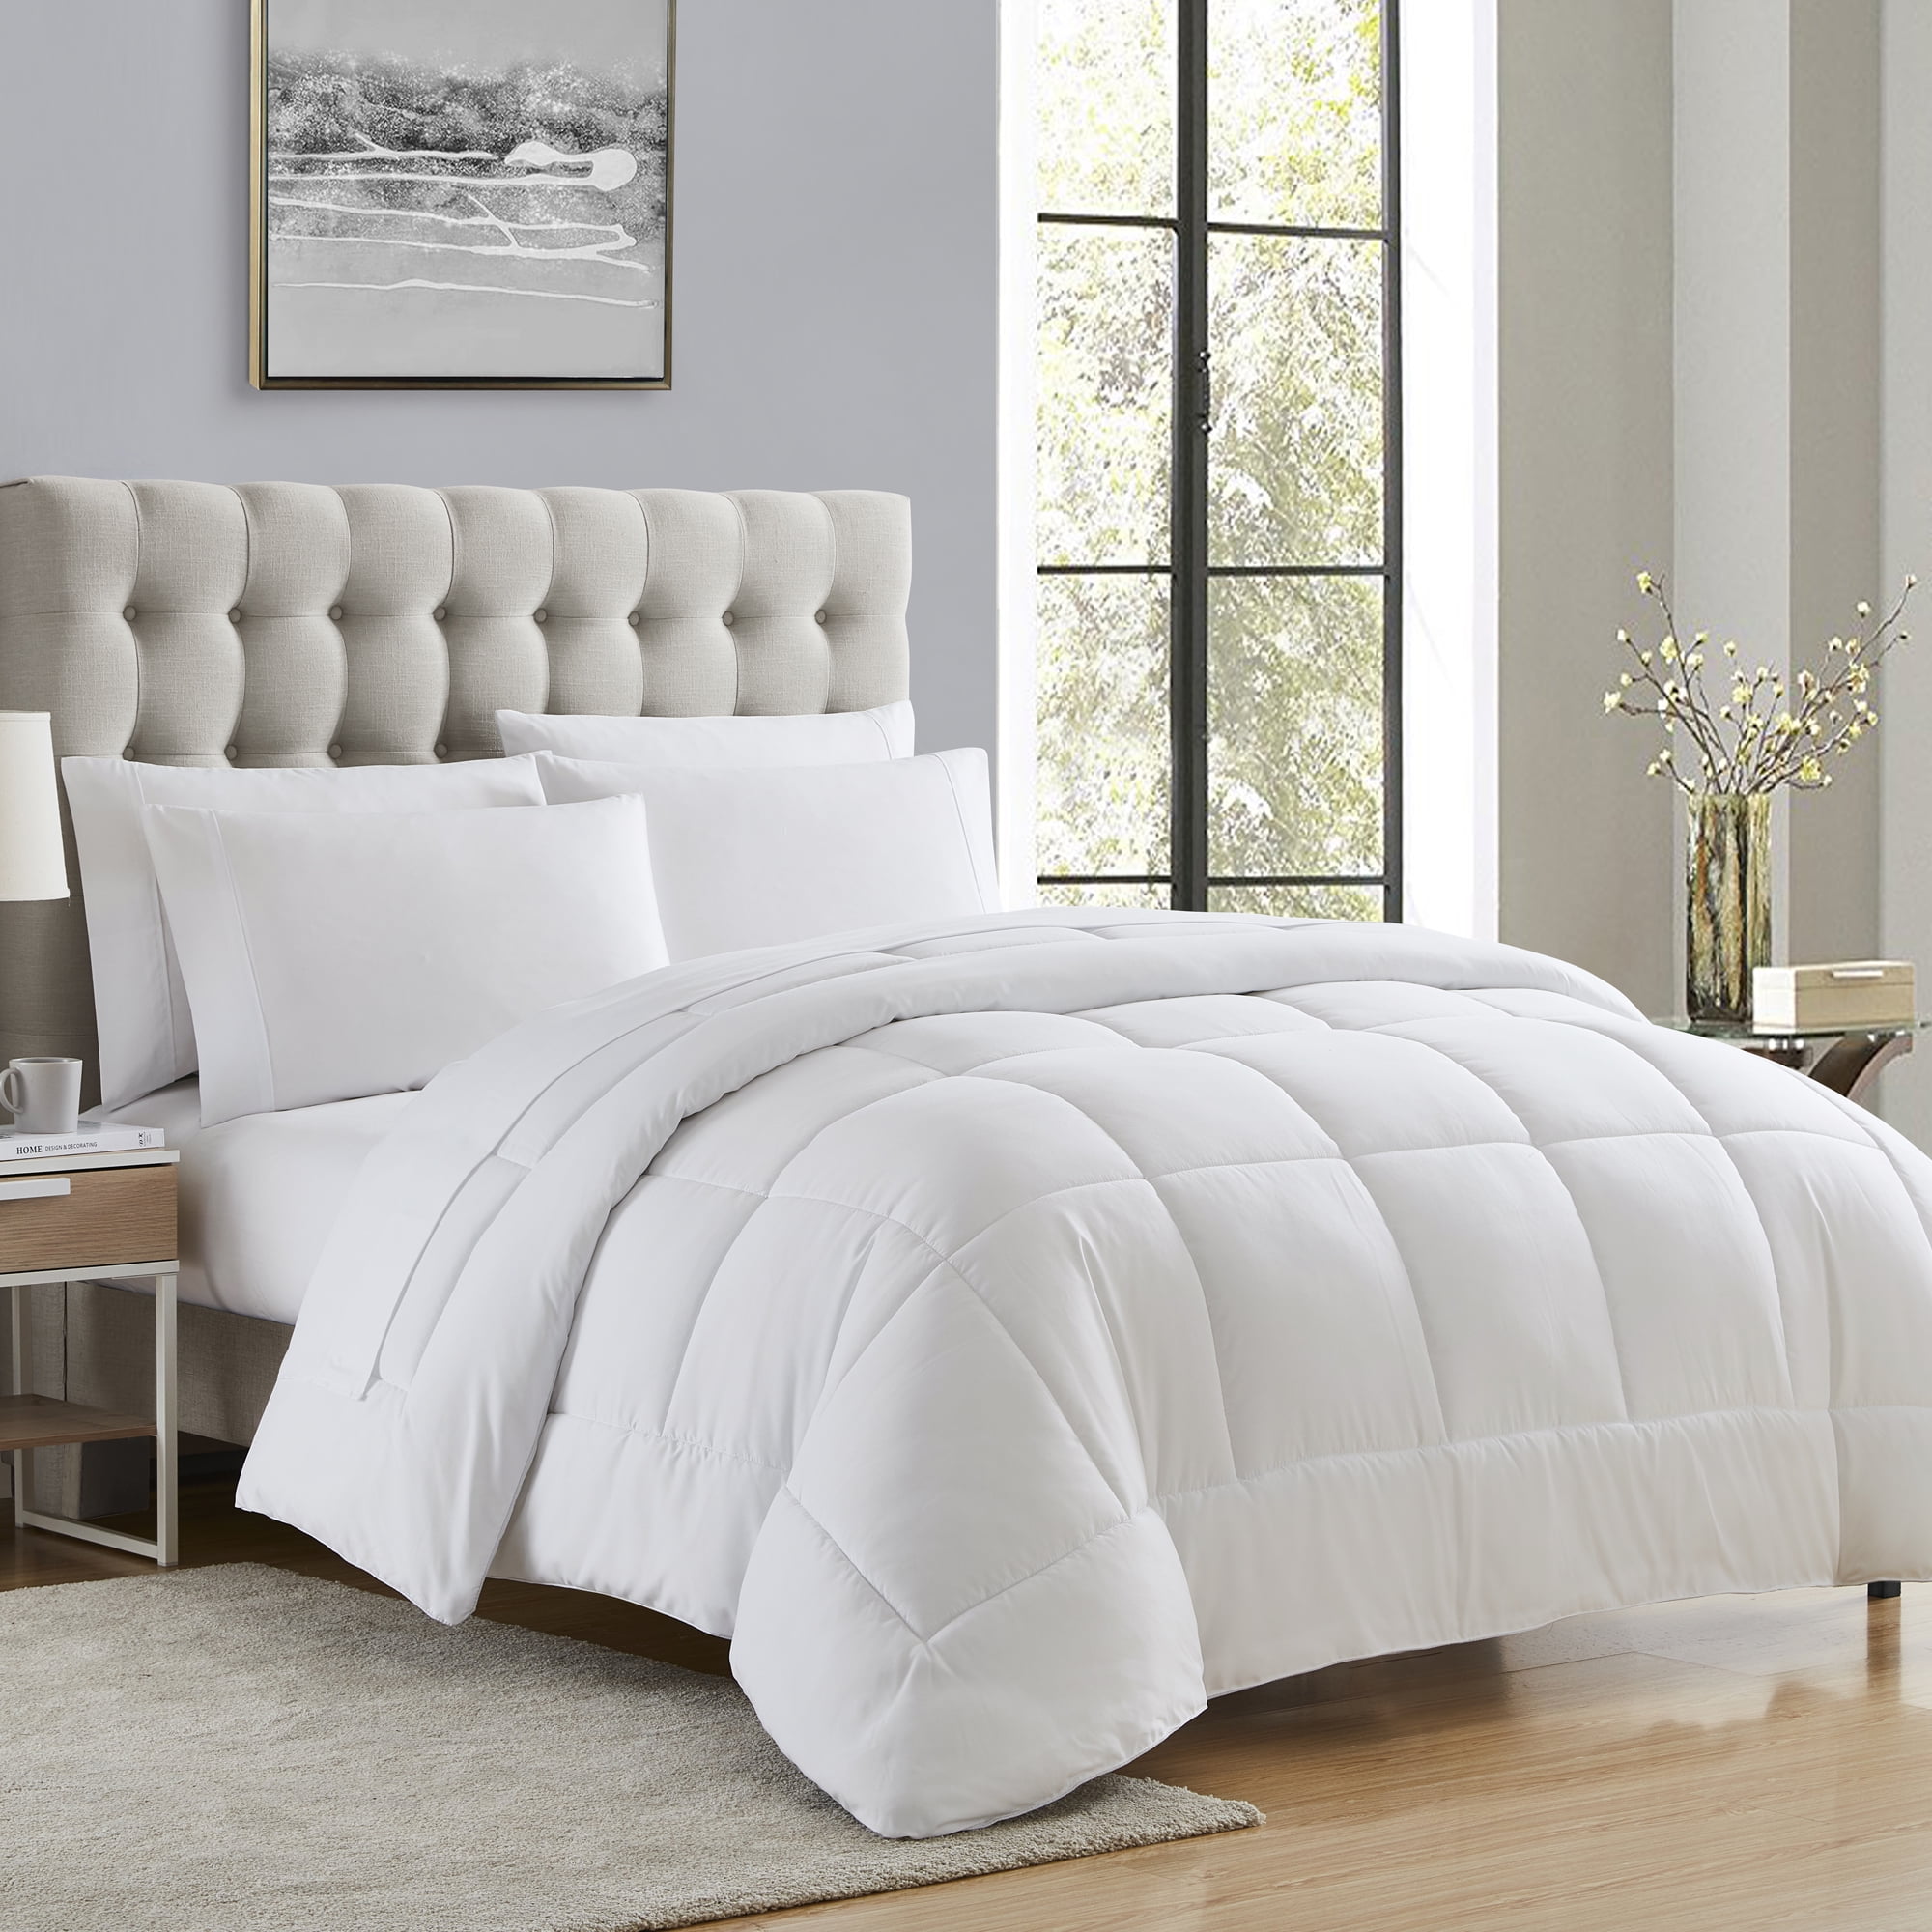 Softest Queen 10-PIECE Bed-in-a-Bag Comforter Set Cindyrealla Luxurious 